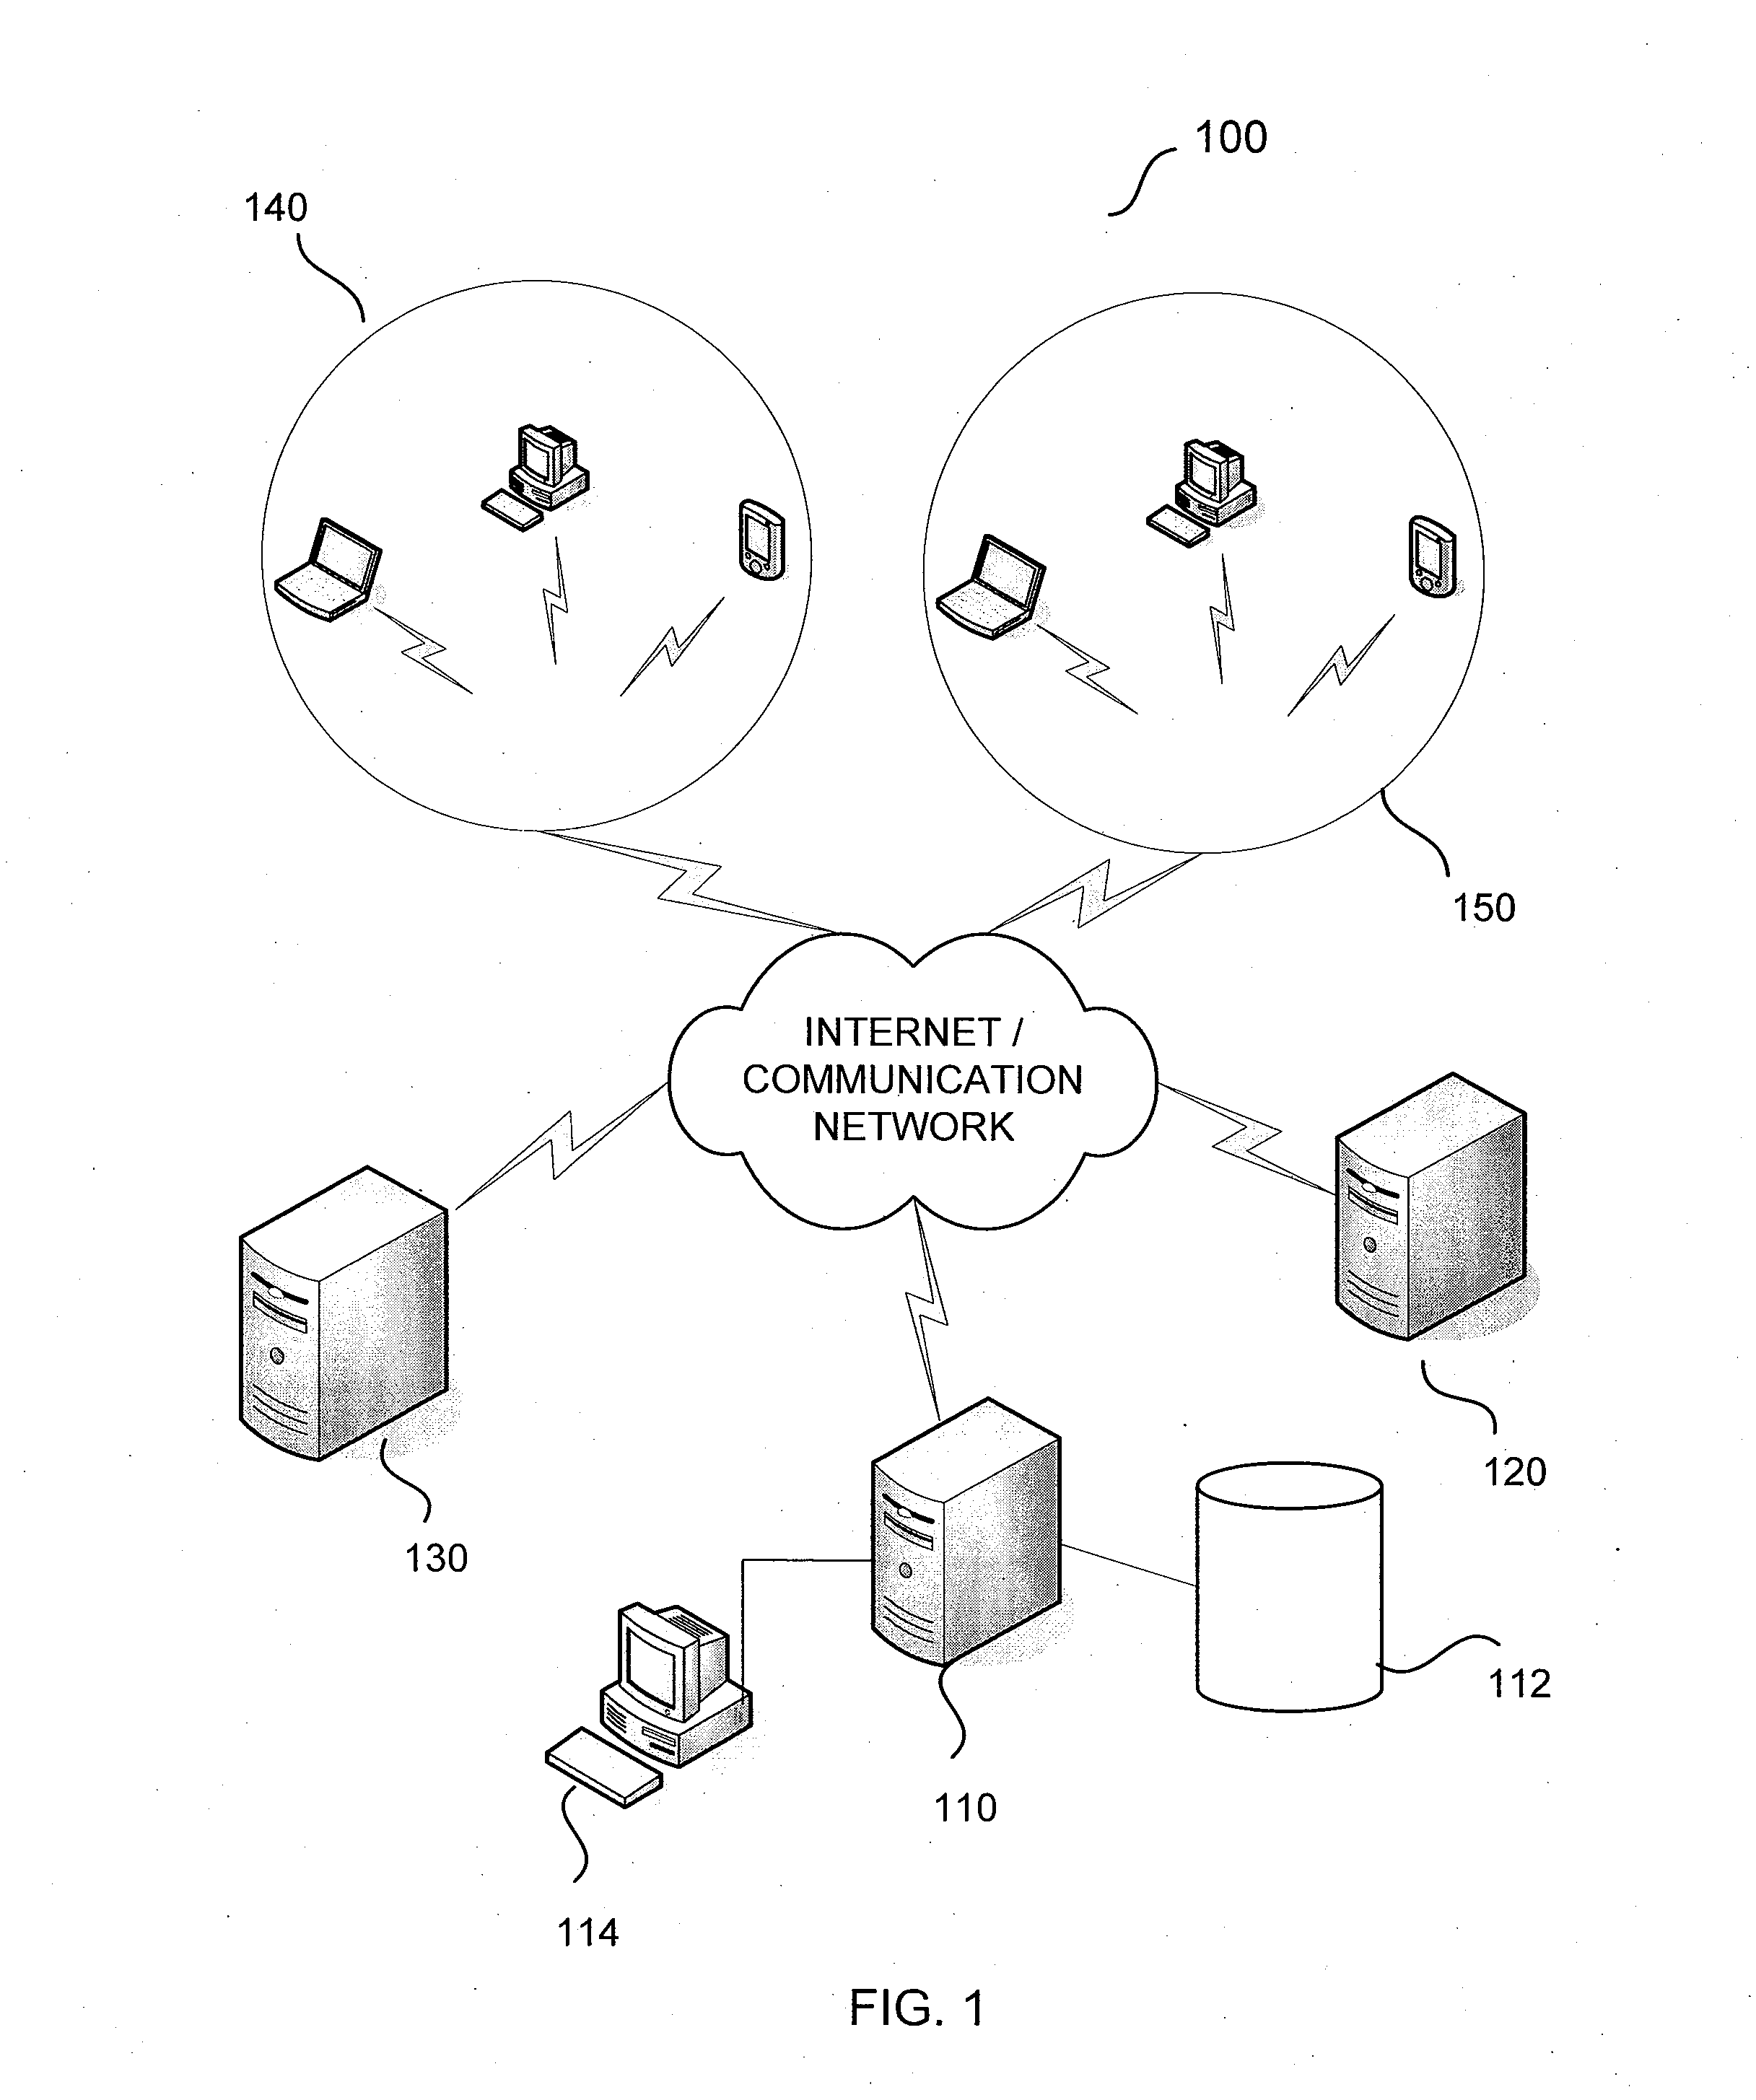 Contact Referral System and Method